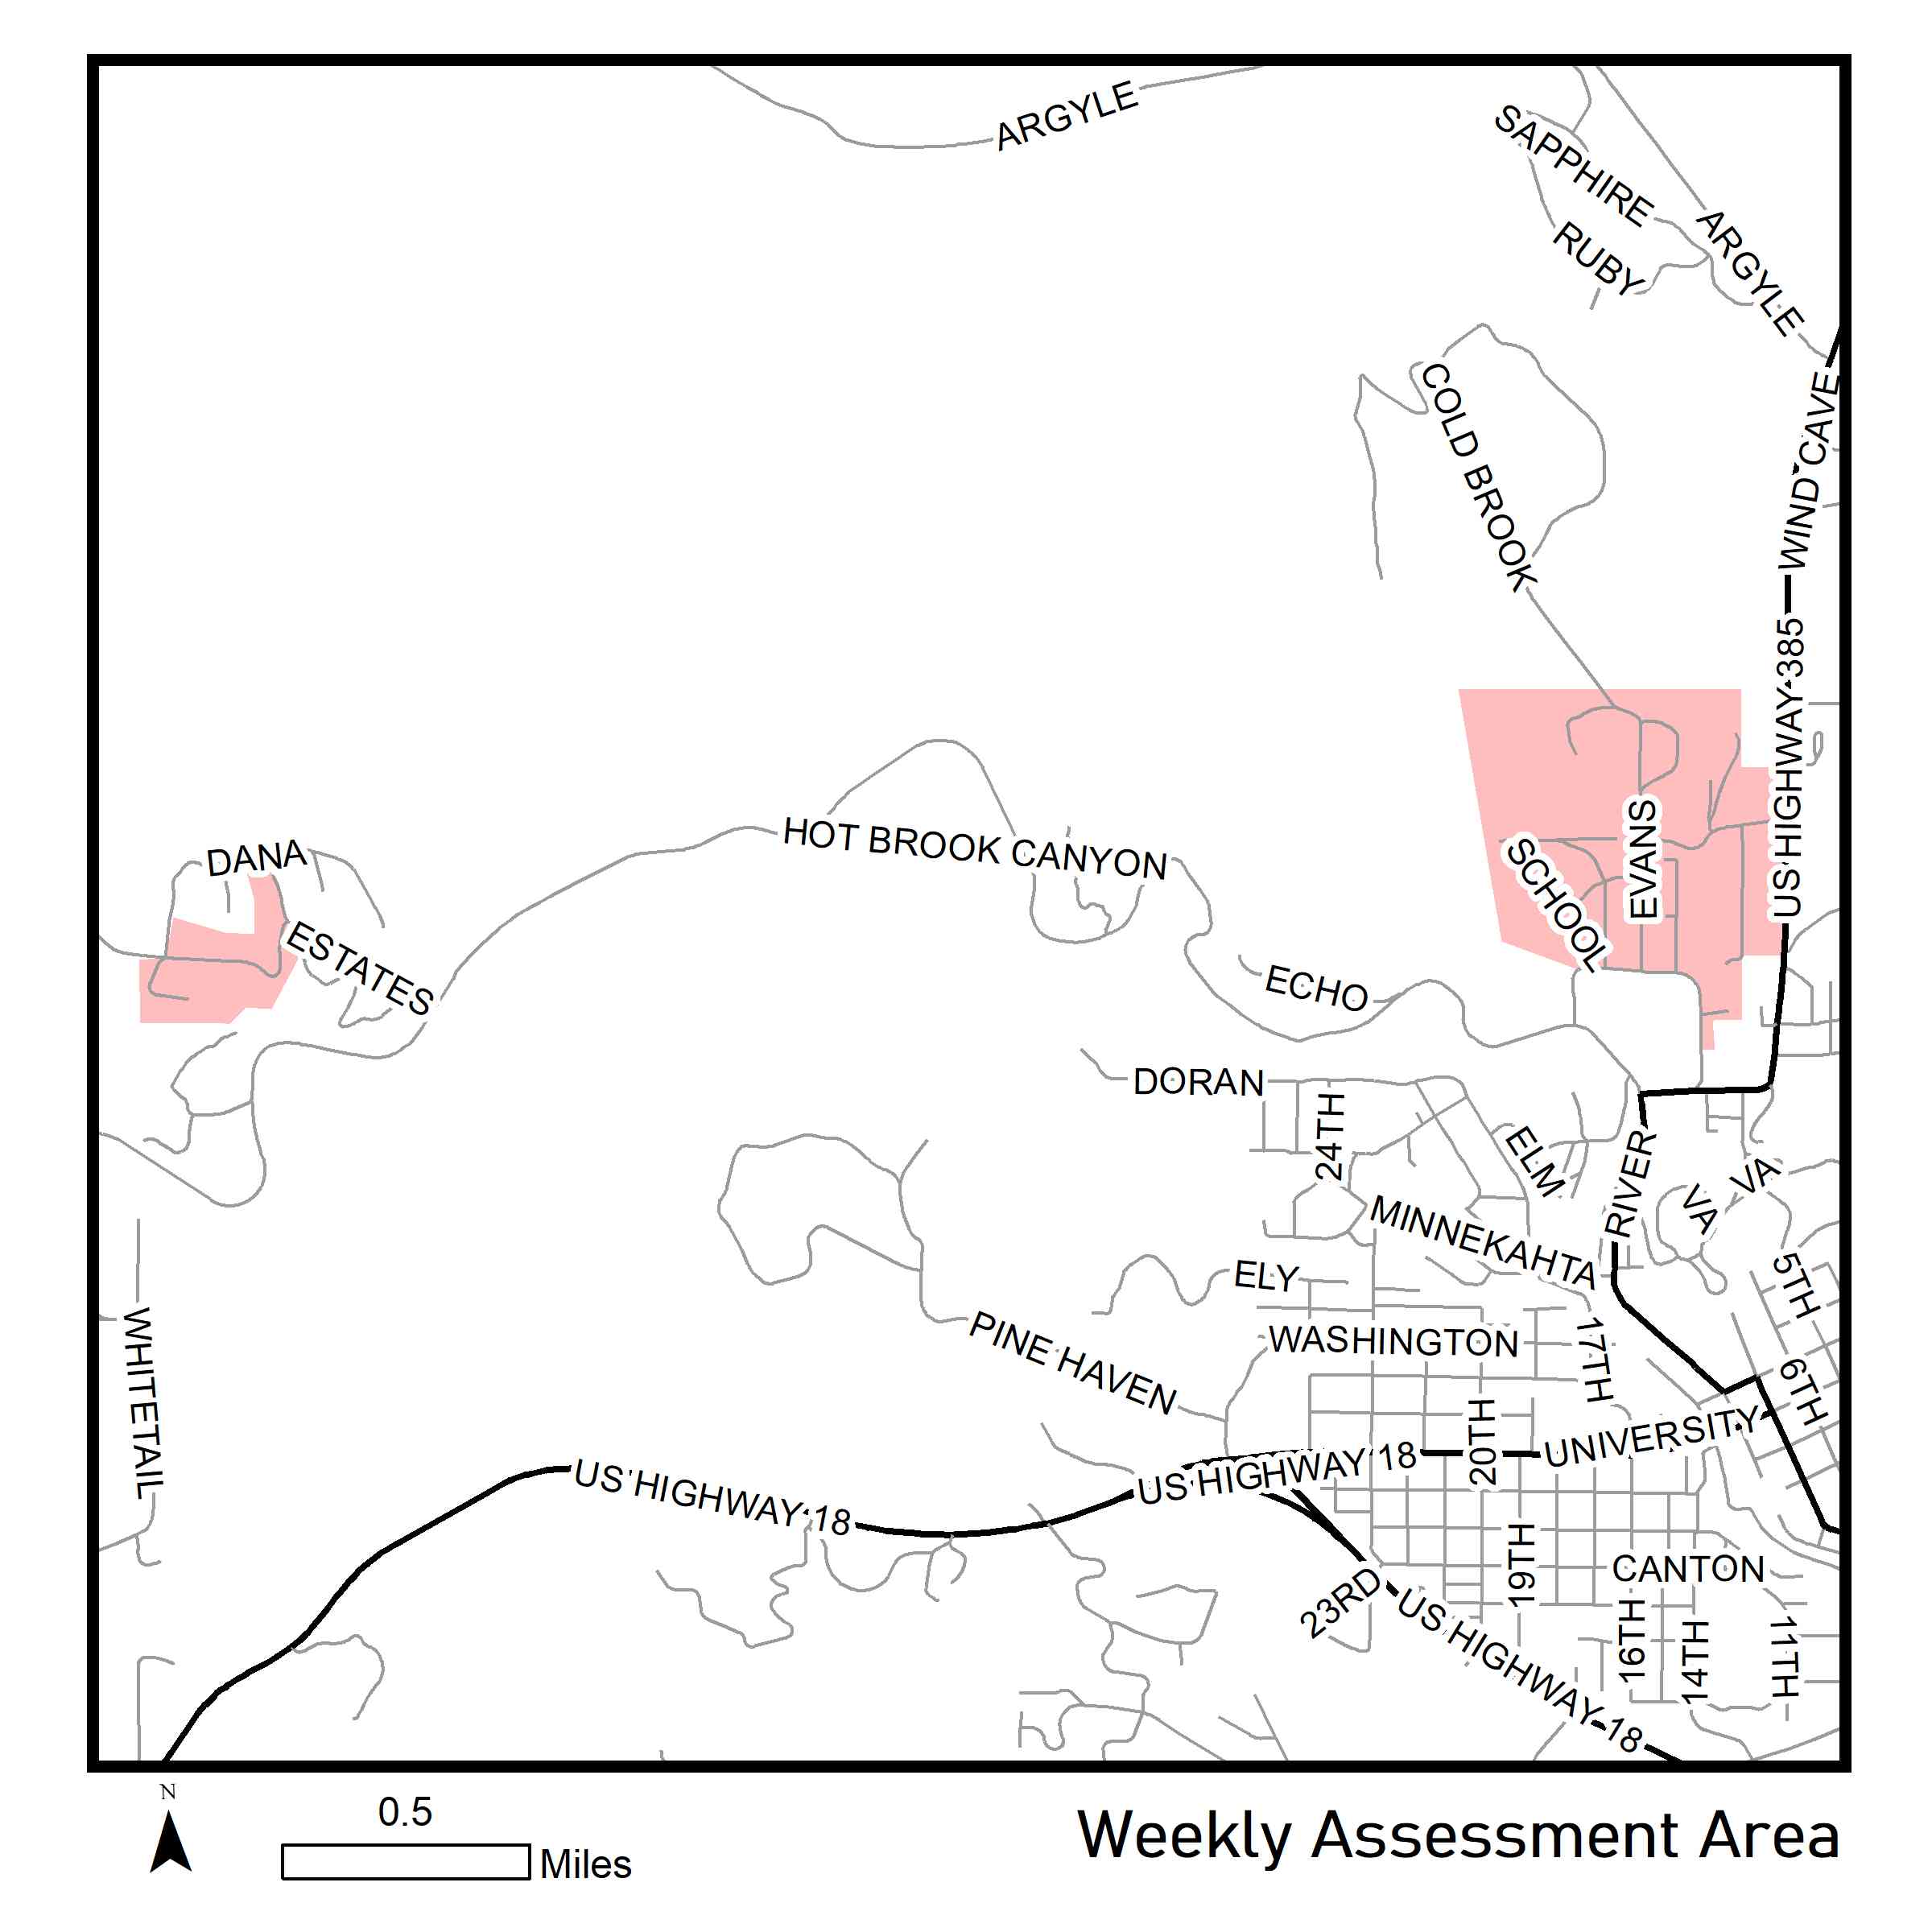 Map of assessment area for week of June 15th, 2020.